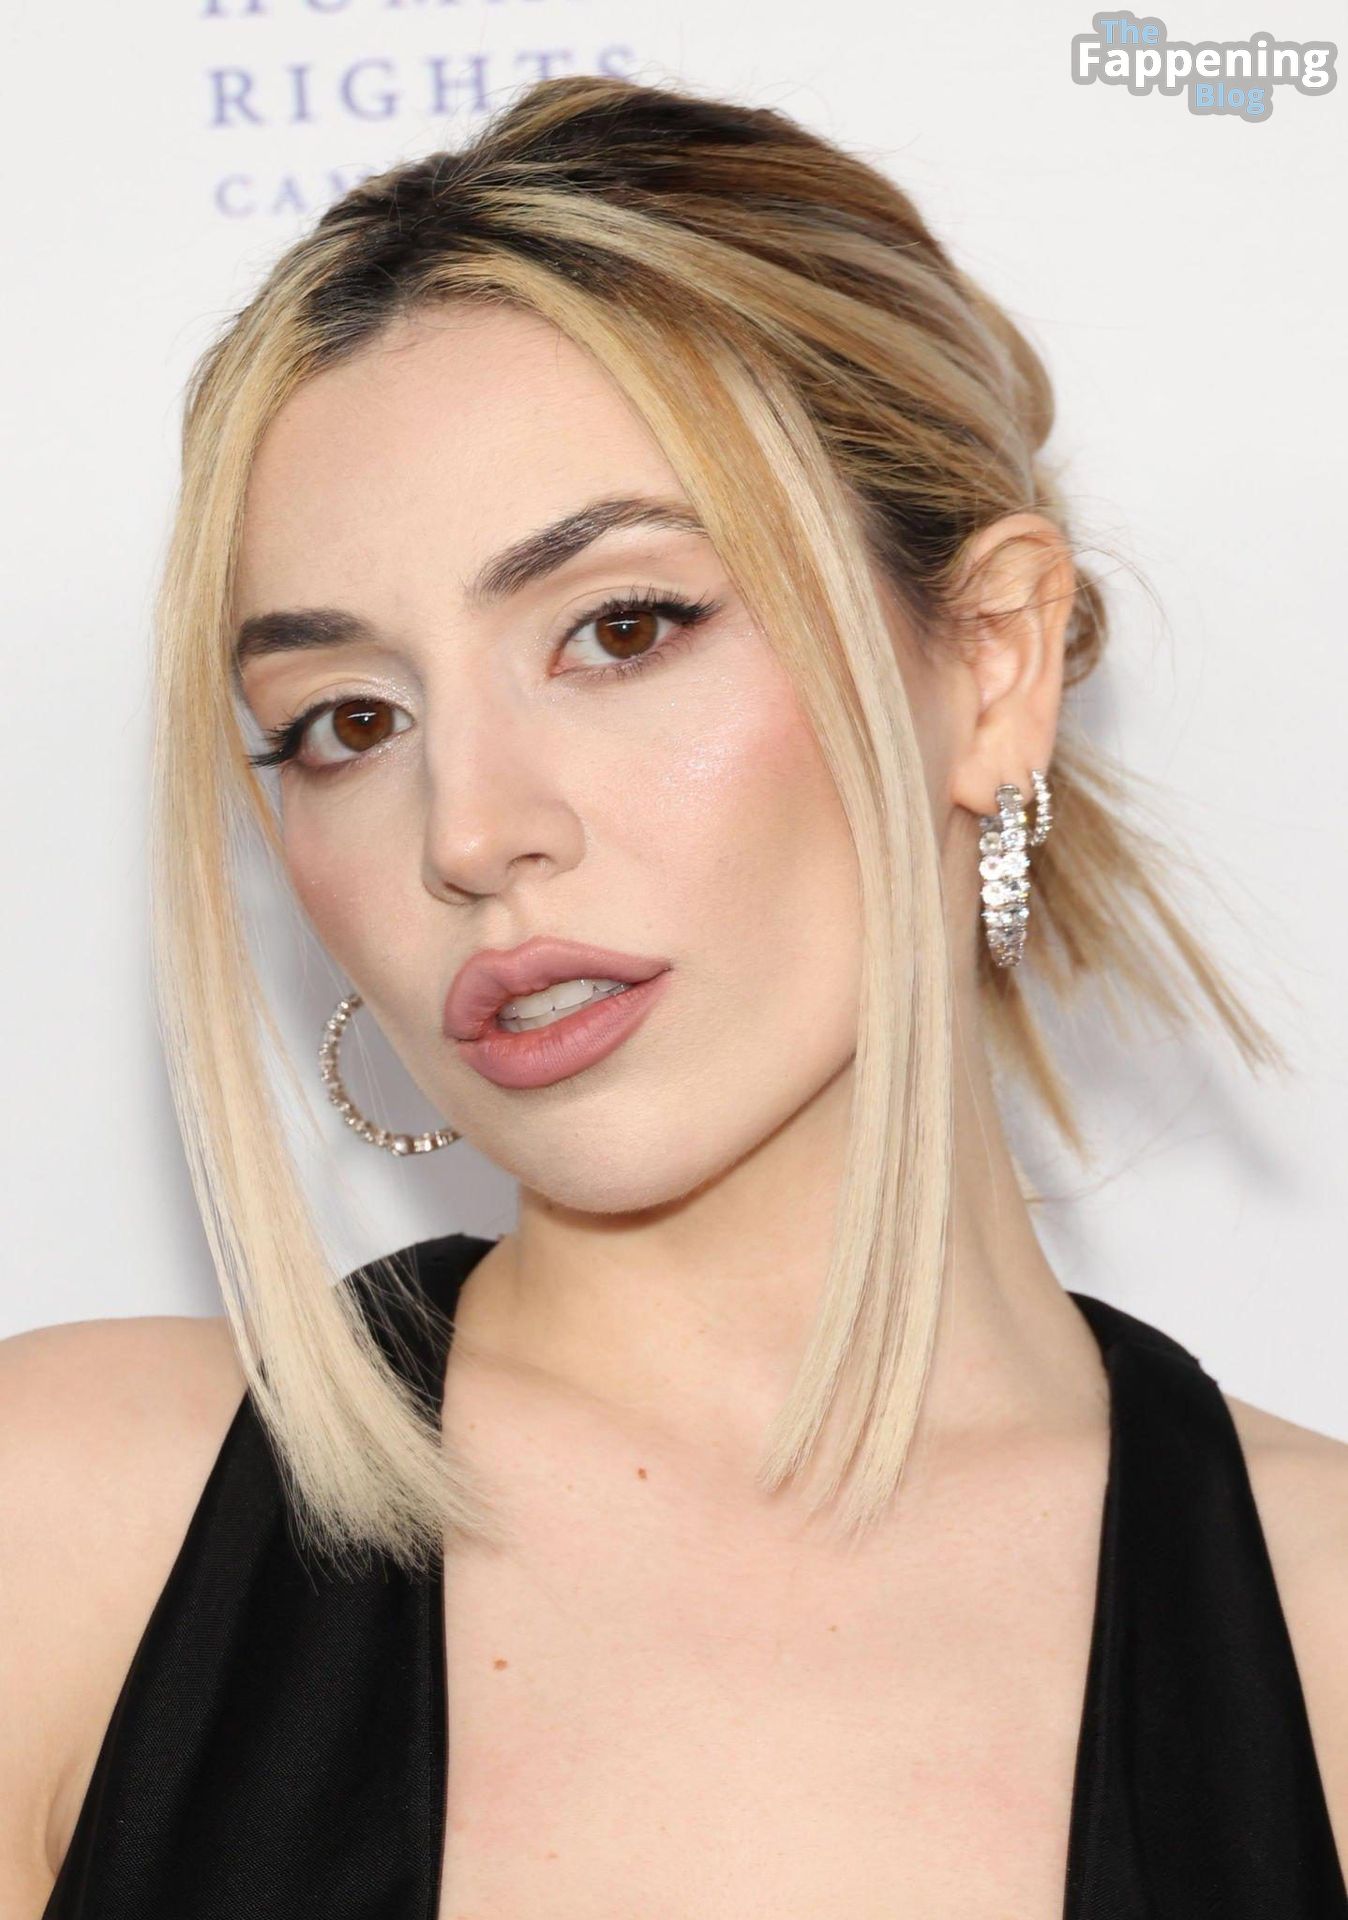 Ava Max Displays Her Sexy Tits at the Human Rights Campaign 2023 LA Dinner (46 Photos)